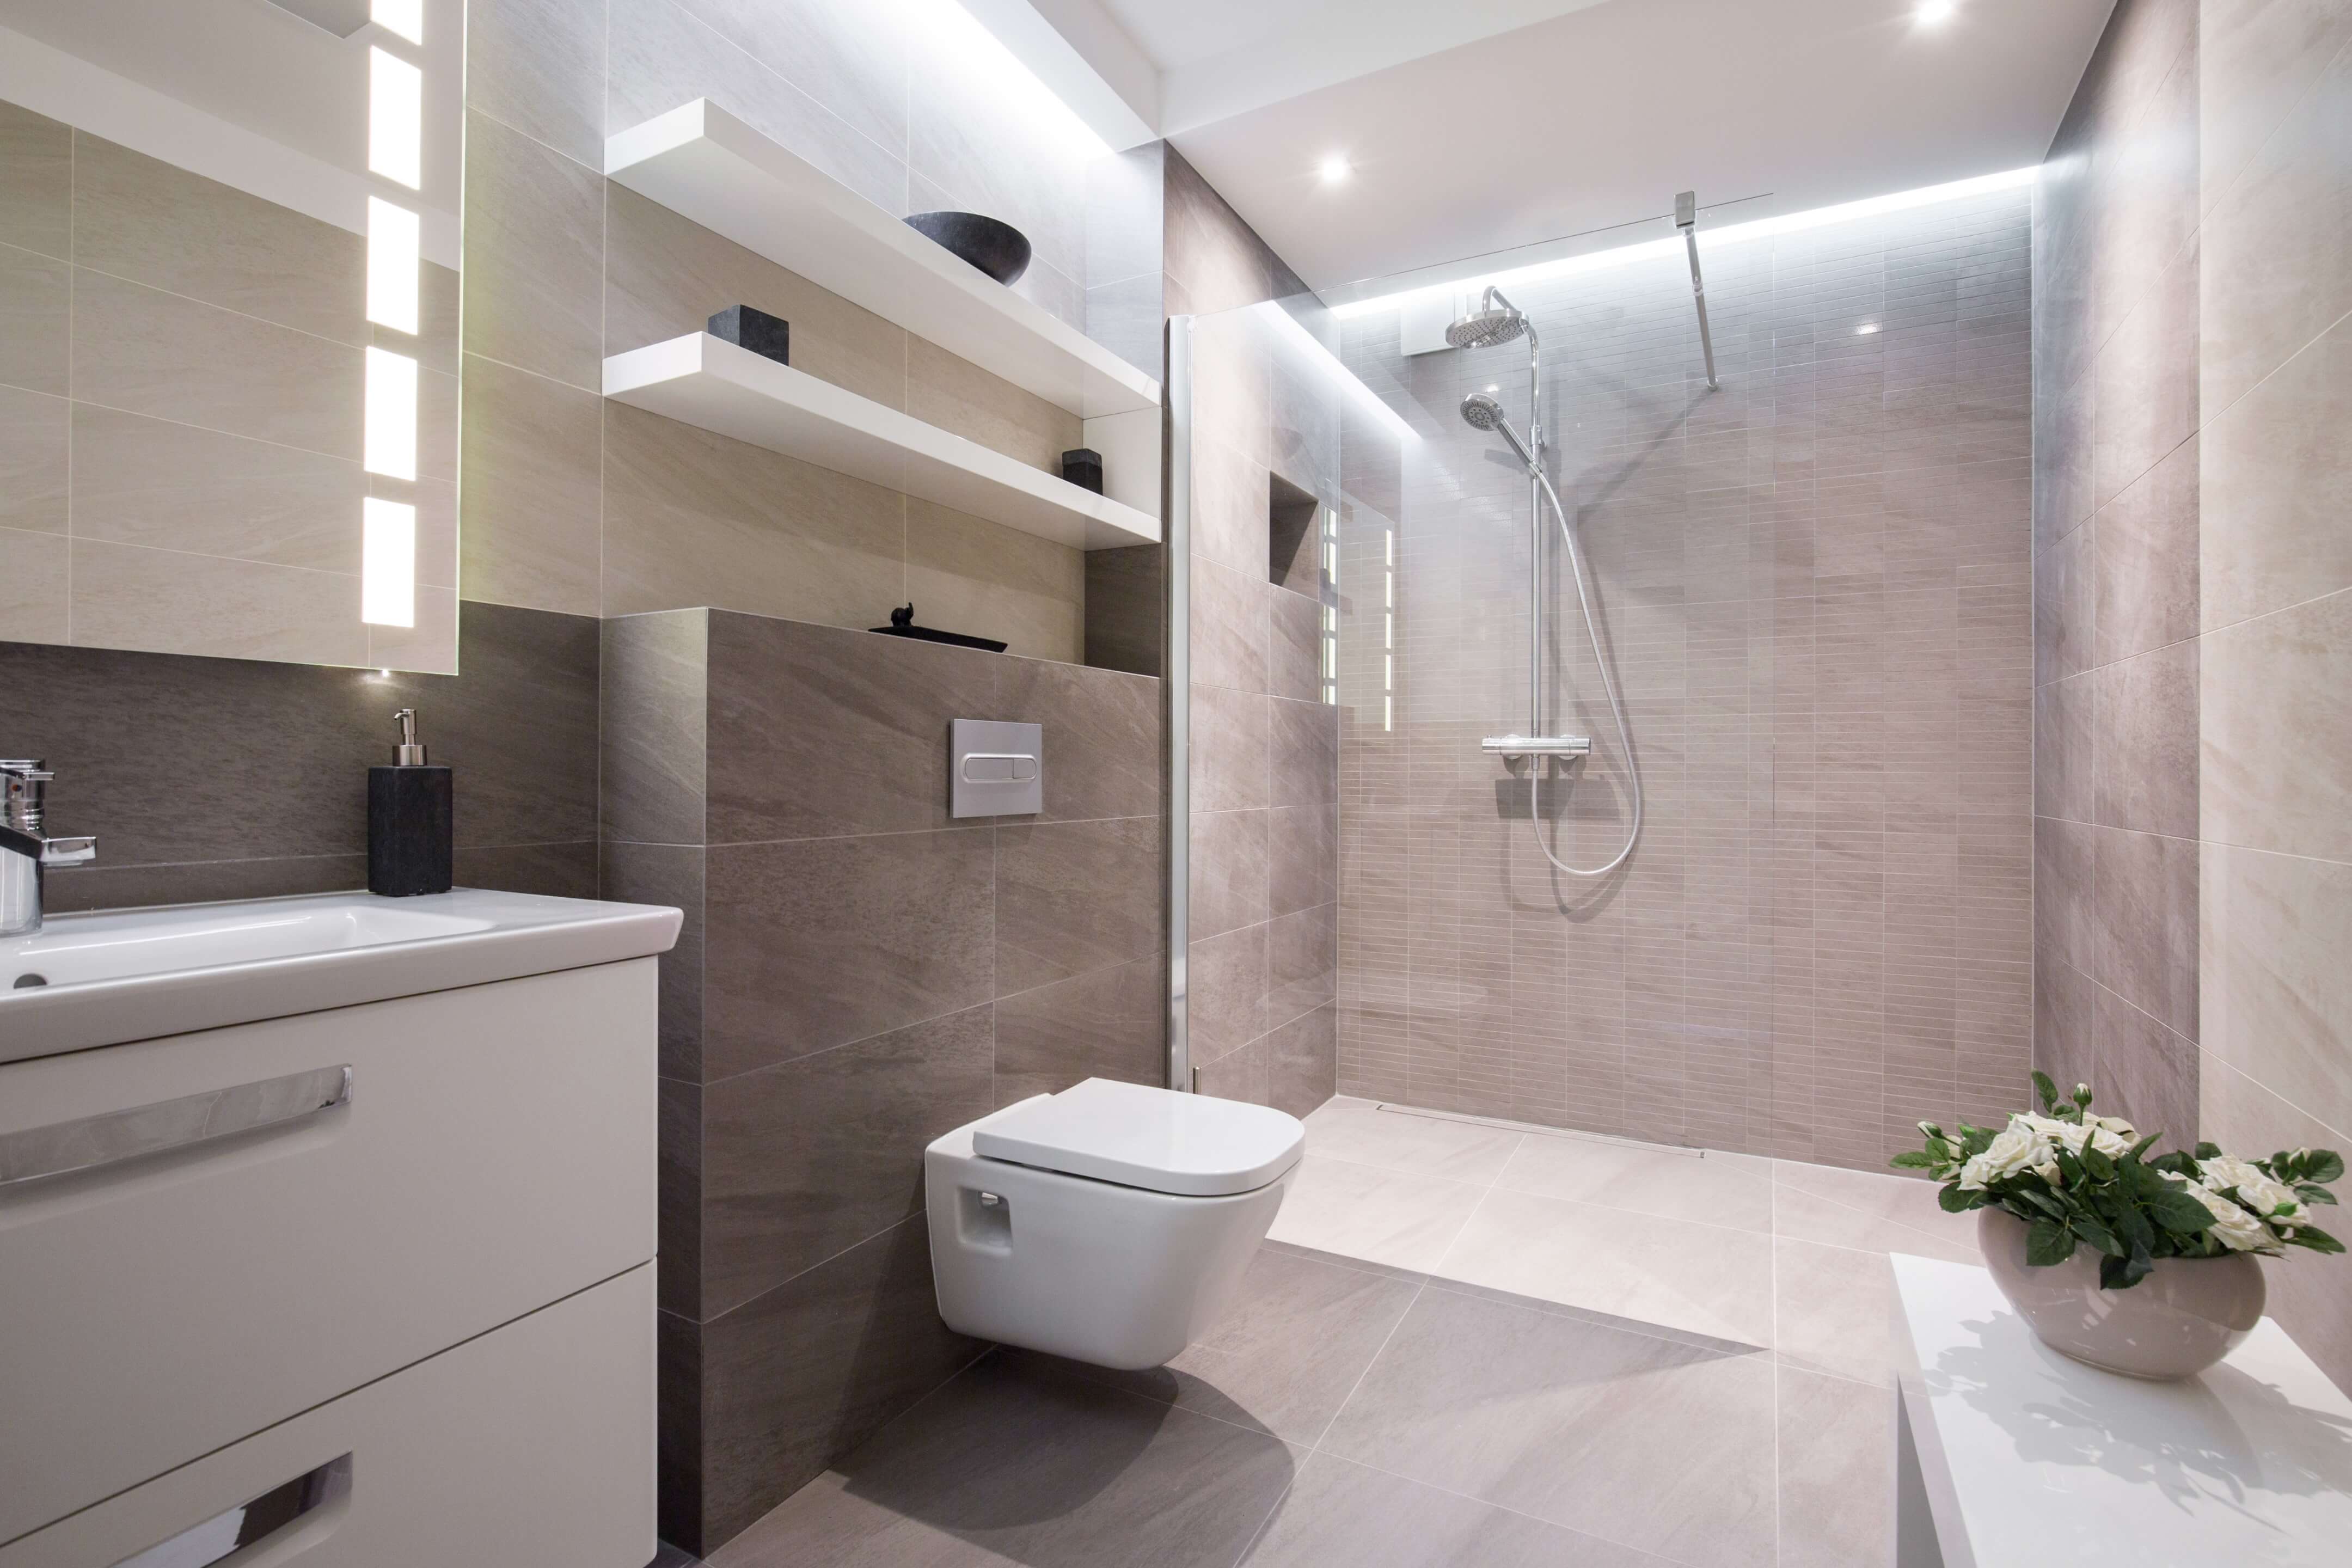 local bathroom fitters wickford